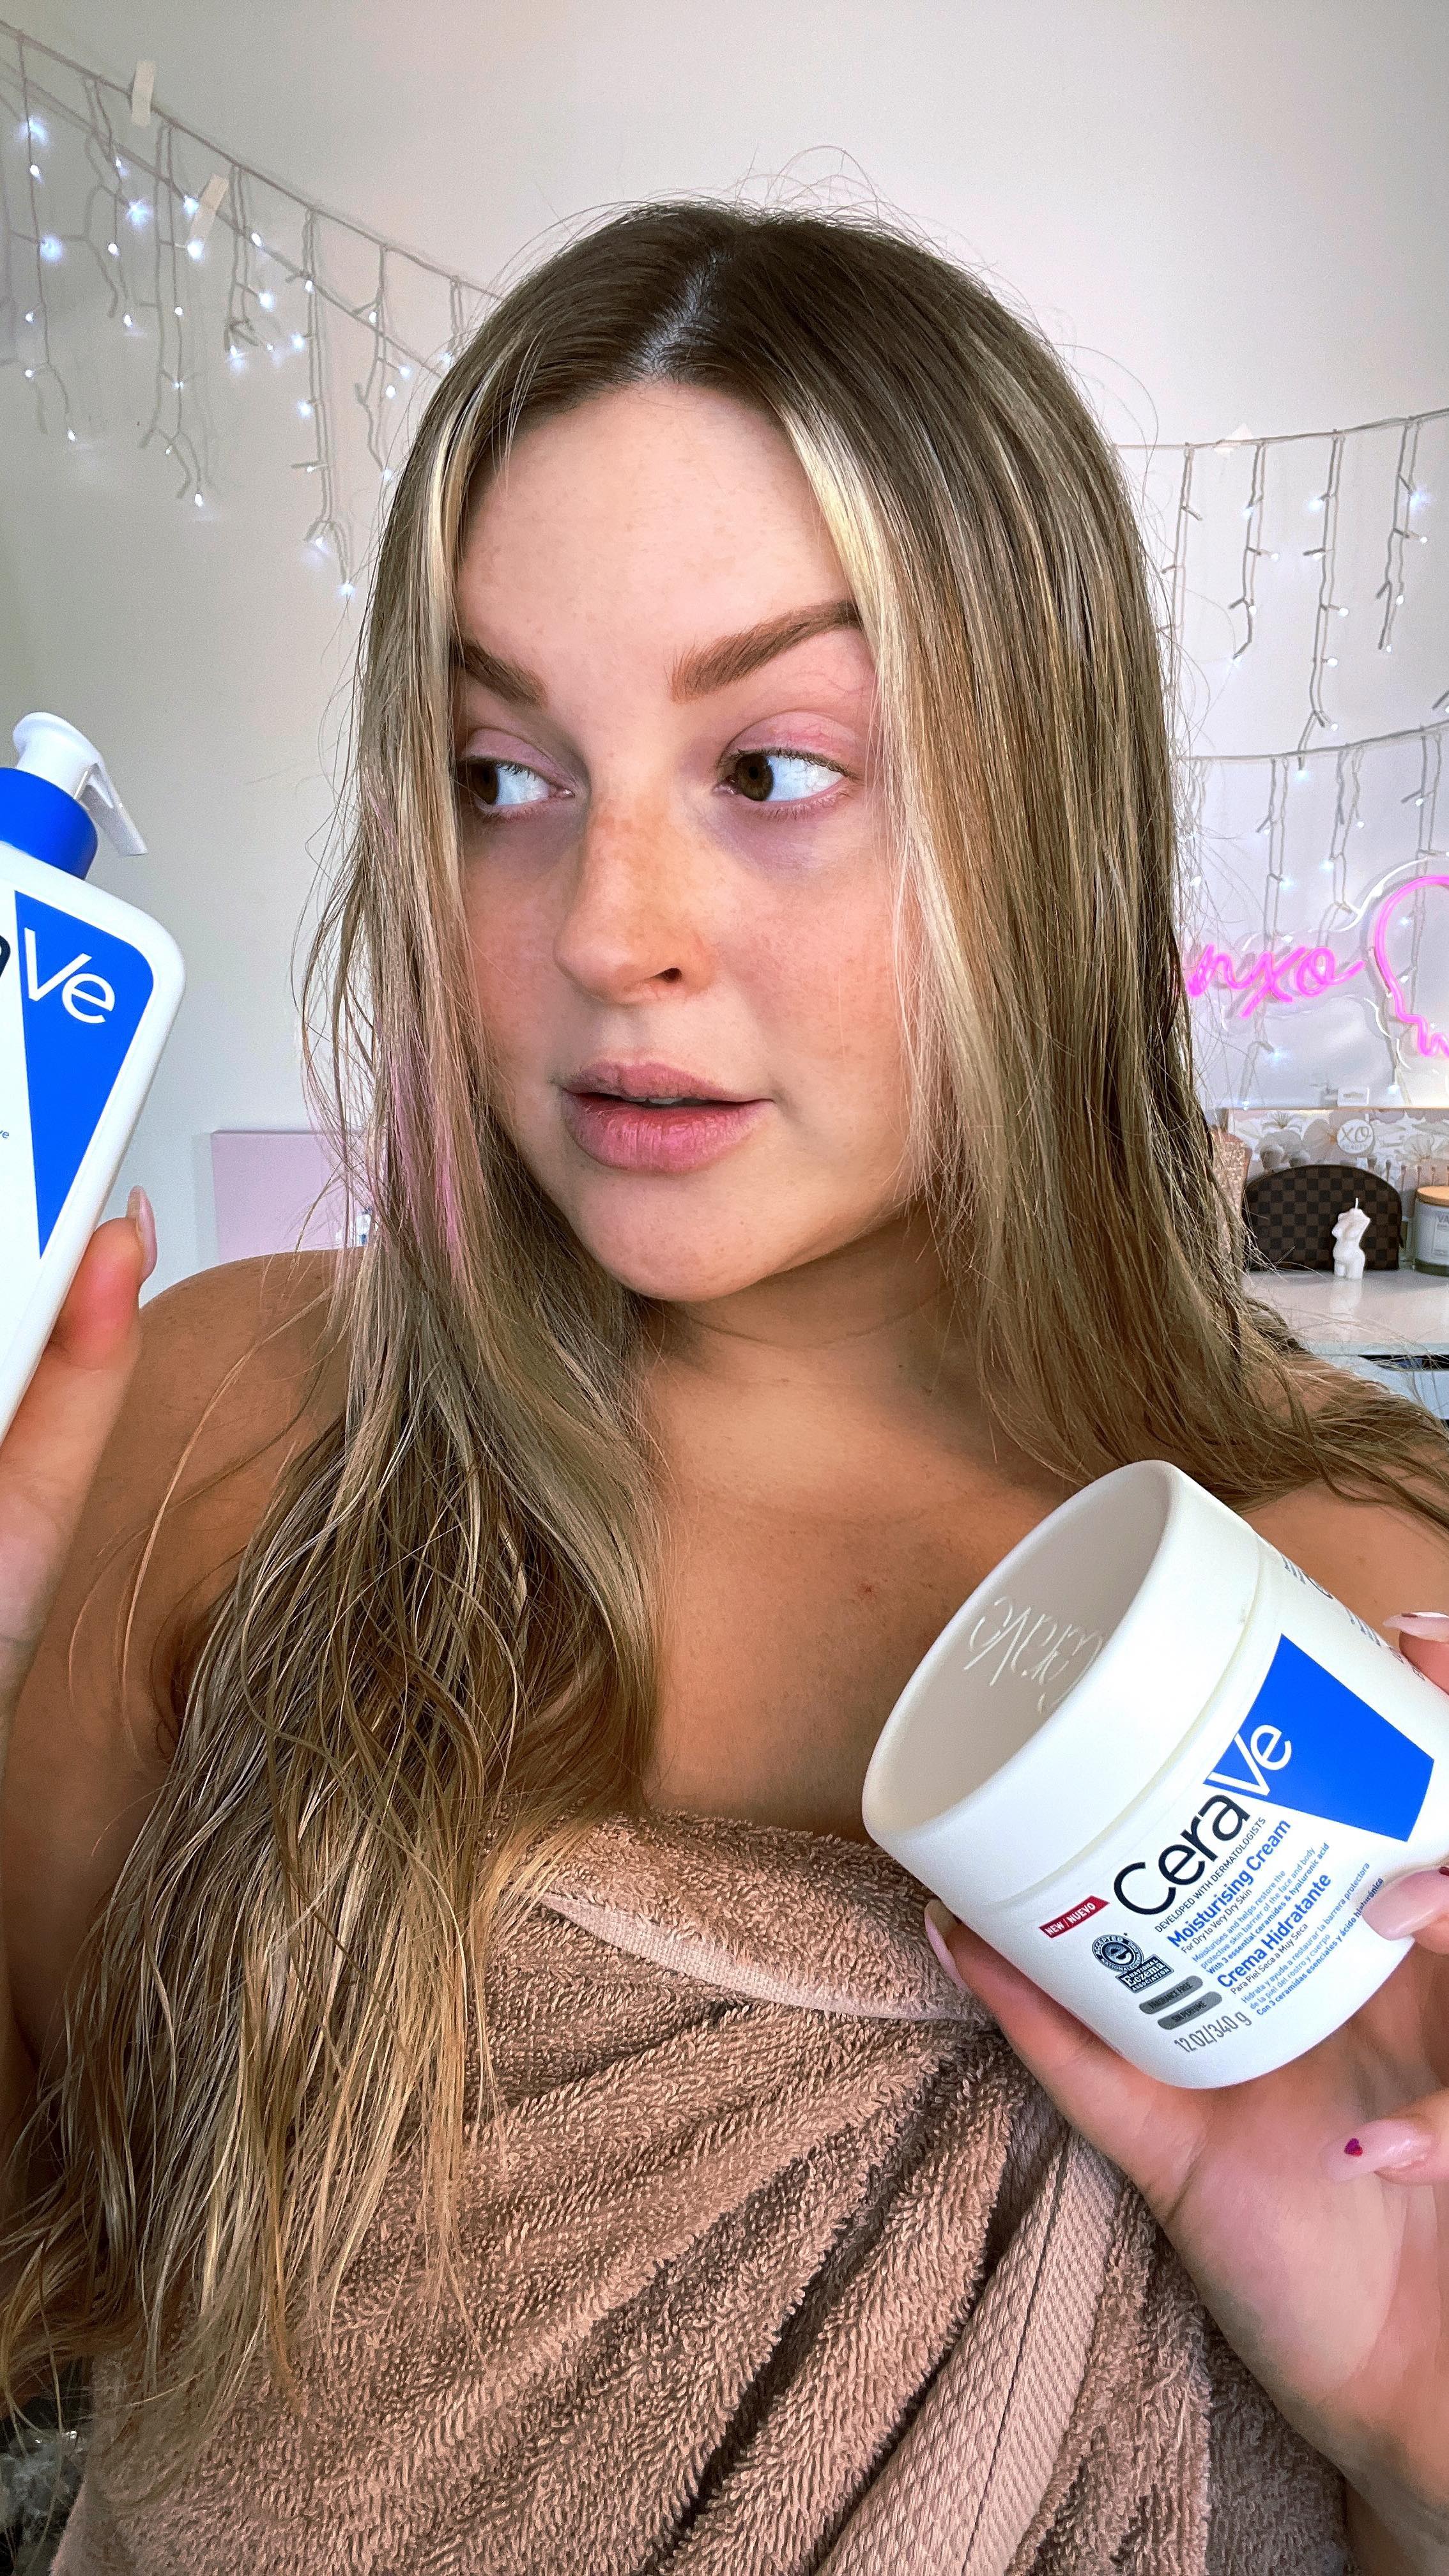 AD the hype is valid guys... the @cerave_aunz range is ✨ wonderful ✨ I have SUPER dry skin on my body and my face often 